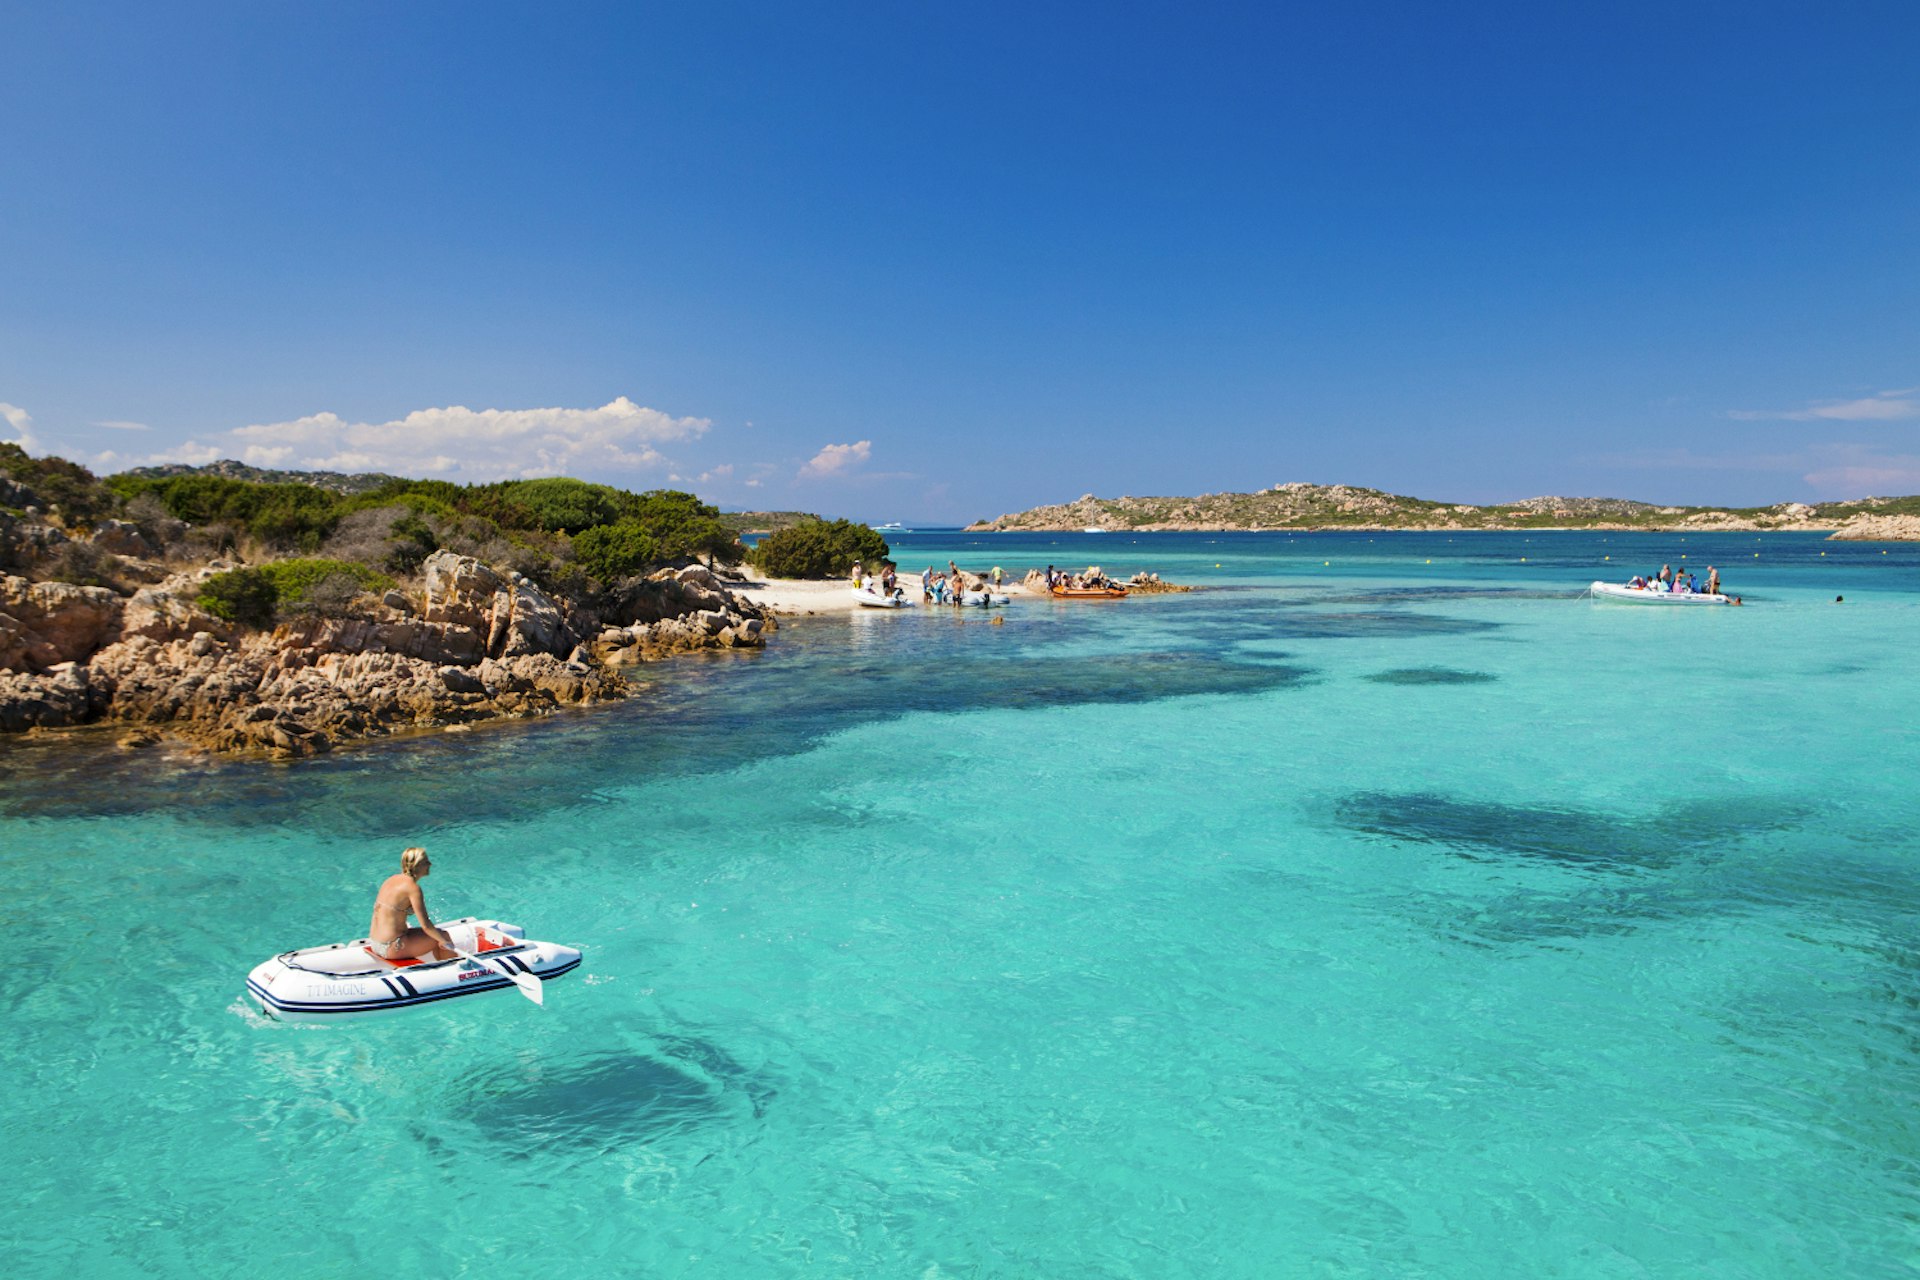 A person sits in a small inflatable boat in the light blue waters of the Isola Maddelena archipelago, Sardinia. 